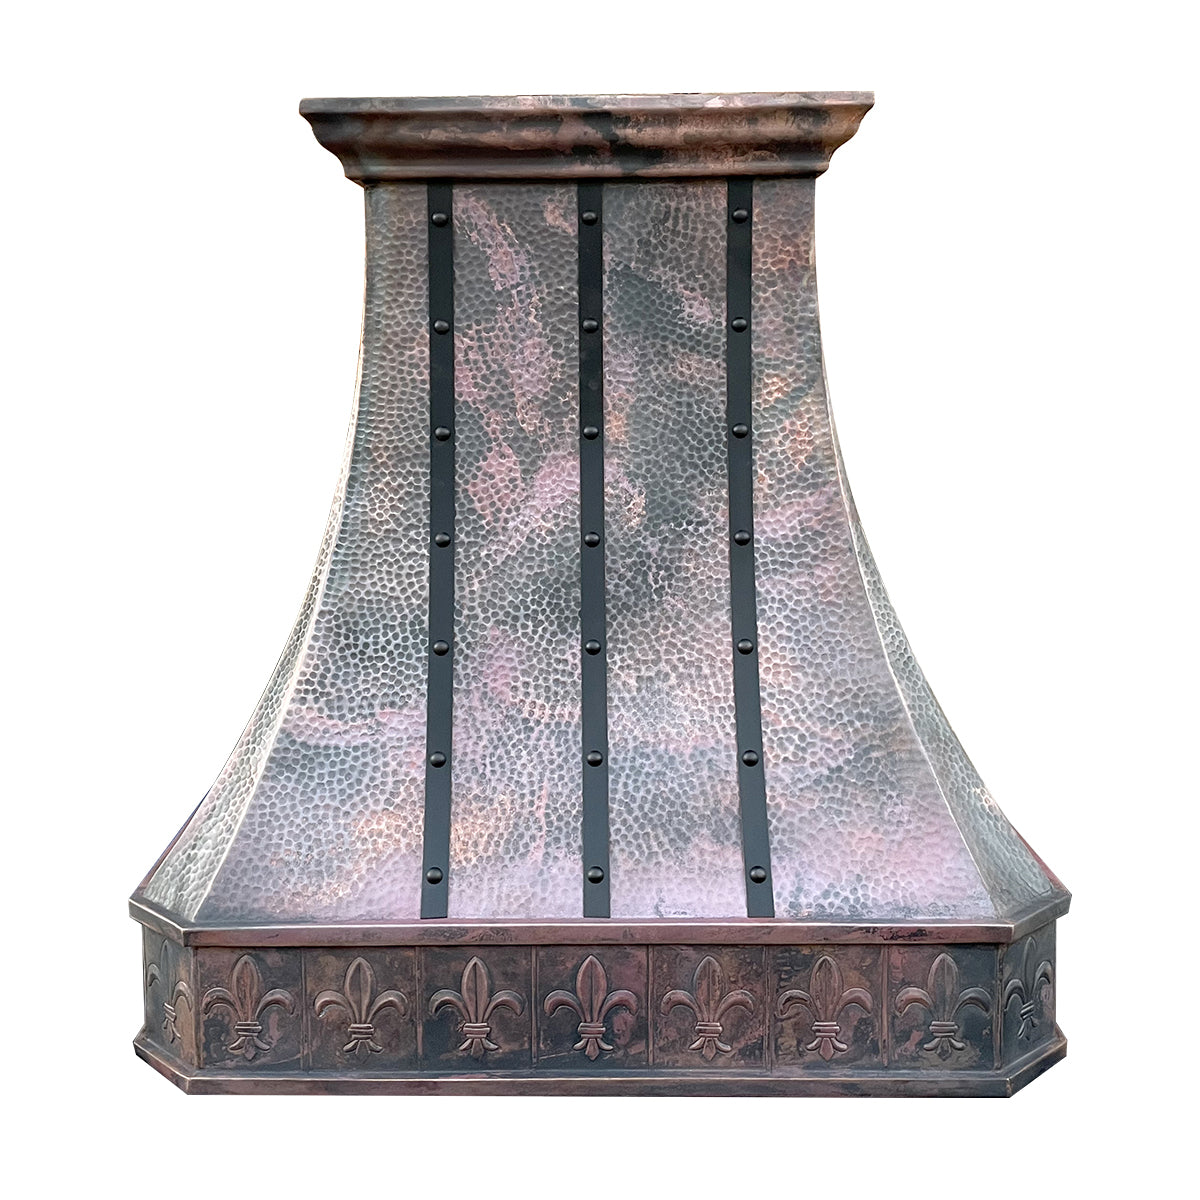 Fobest Instock Island Copper Range Hood FCP-69 (36"W x 27"D x 37"H), Four Colors to Choose